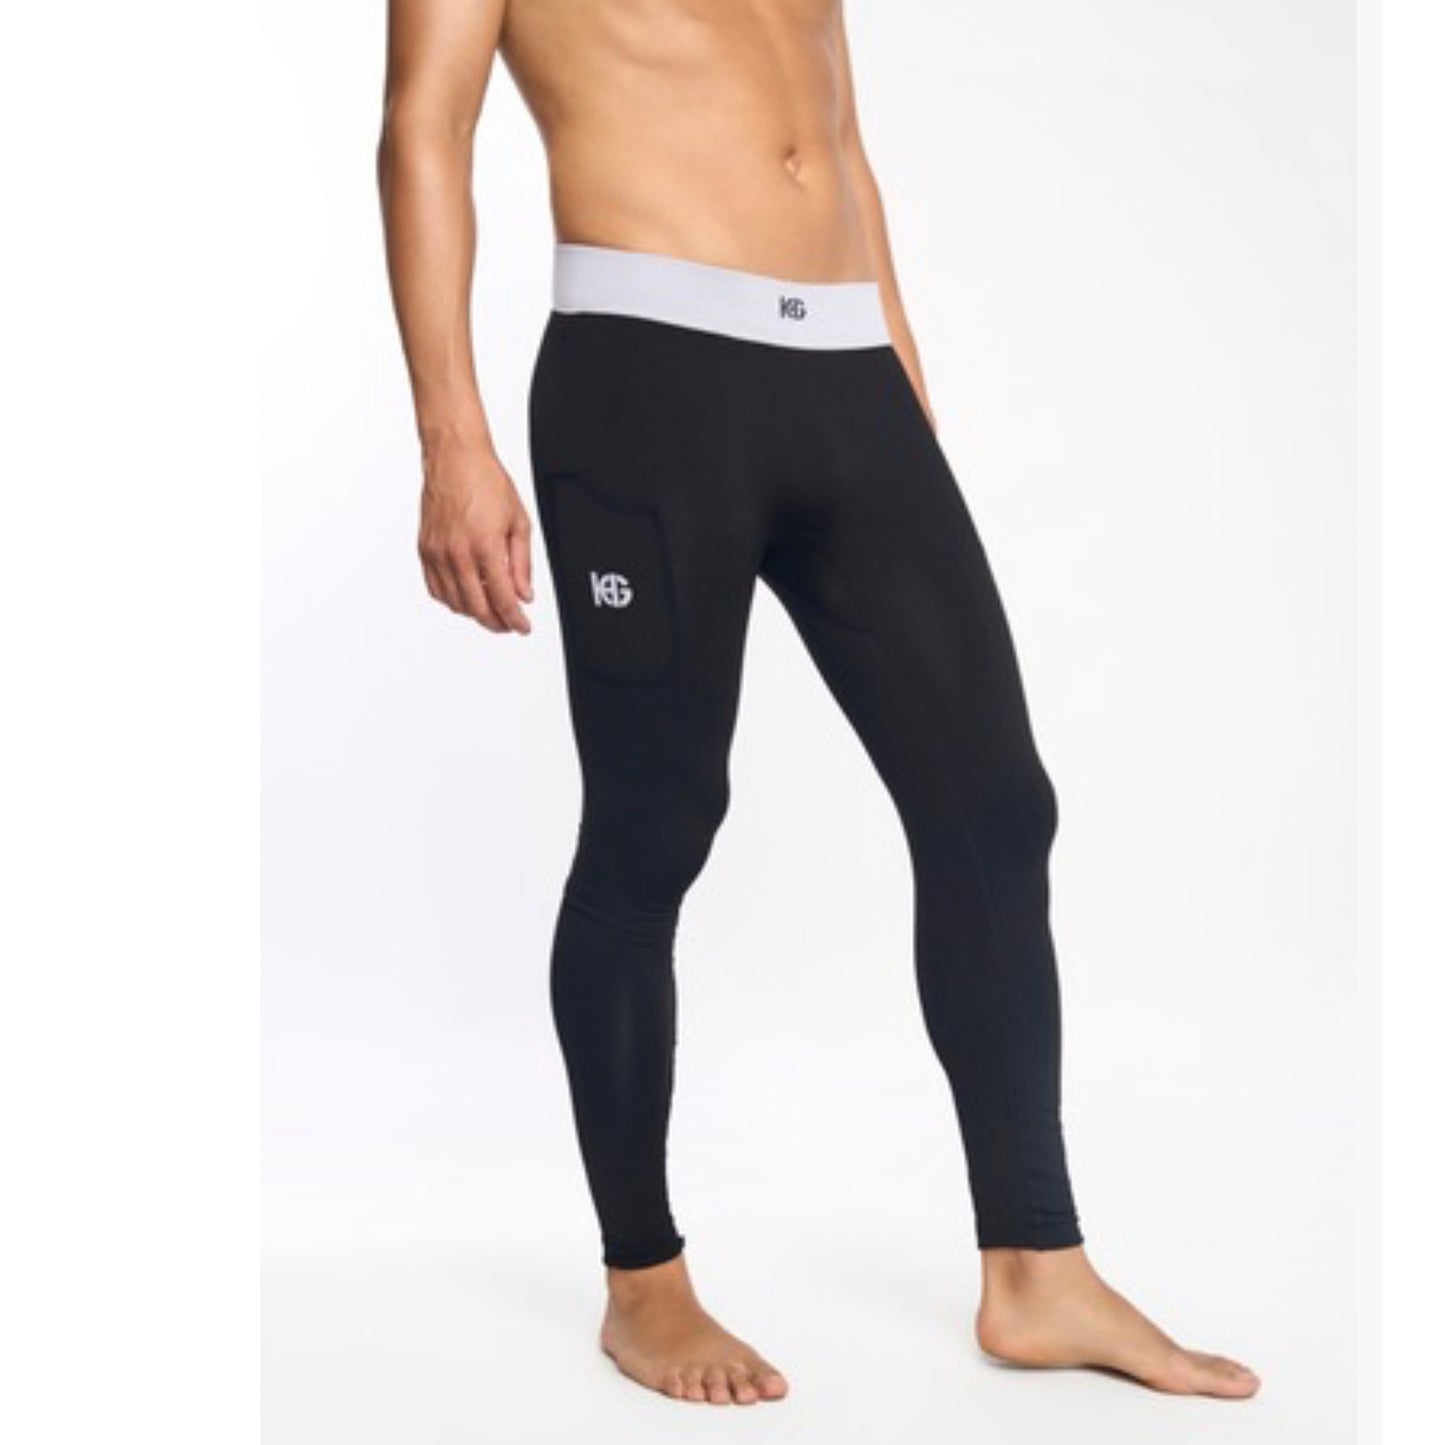 Sport HG Holstein Unisex Technical Riding Tights with Phone Pocket